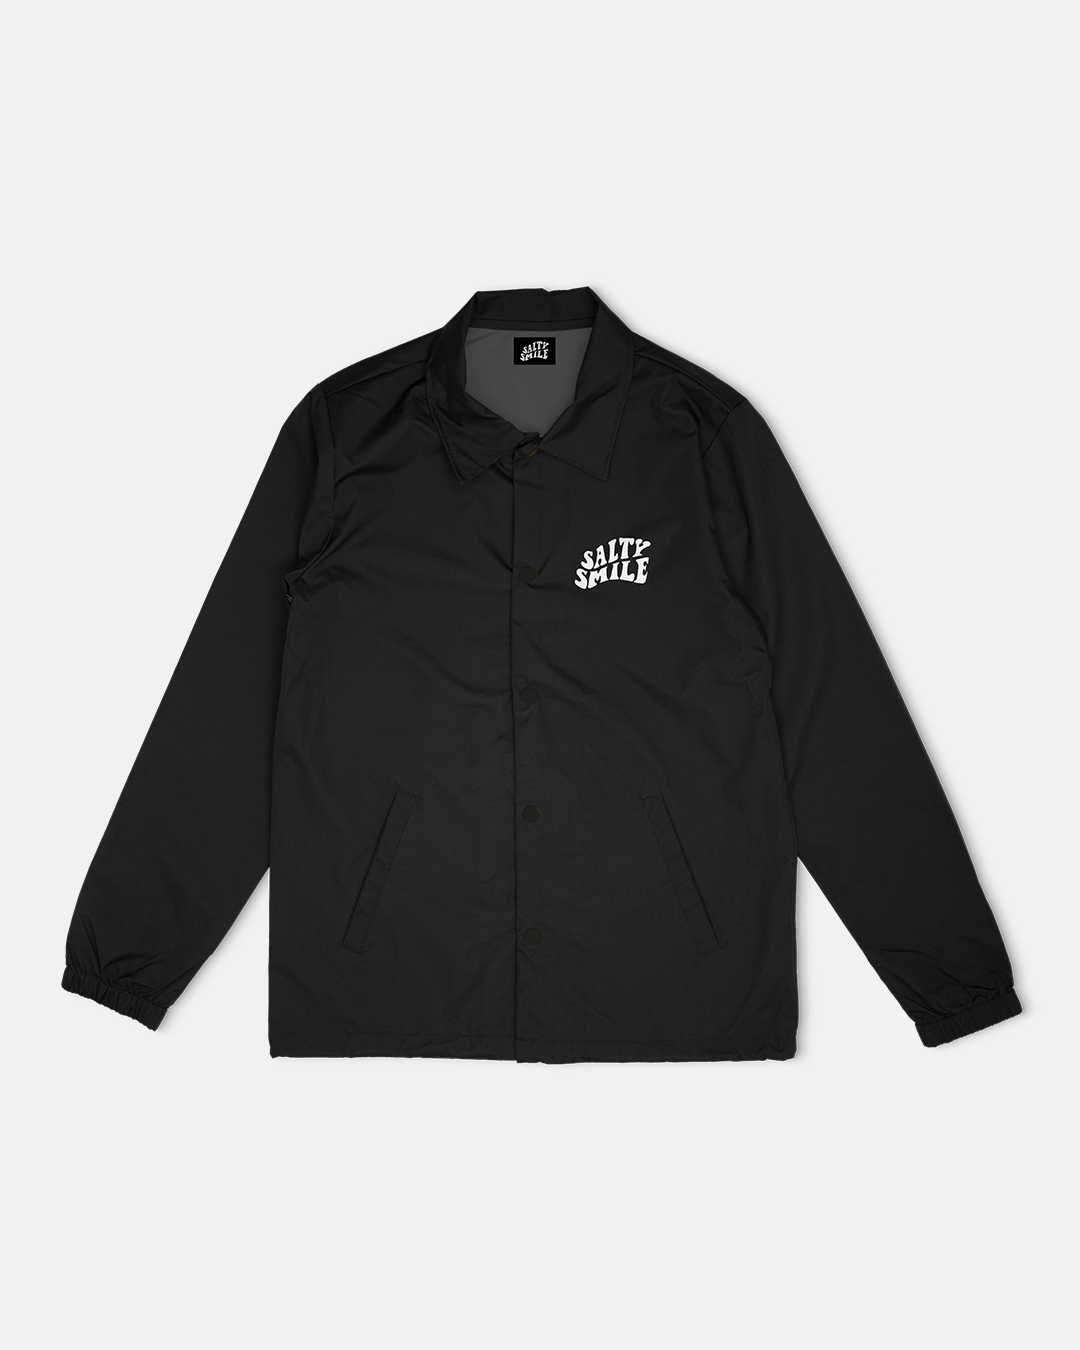 vetements surf salty smile COACH JACKET RECYCLED marque eco responsable